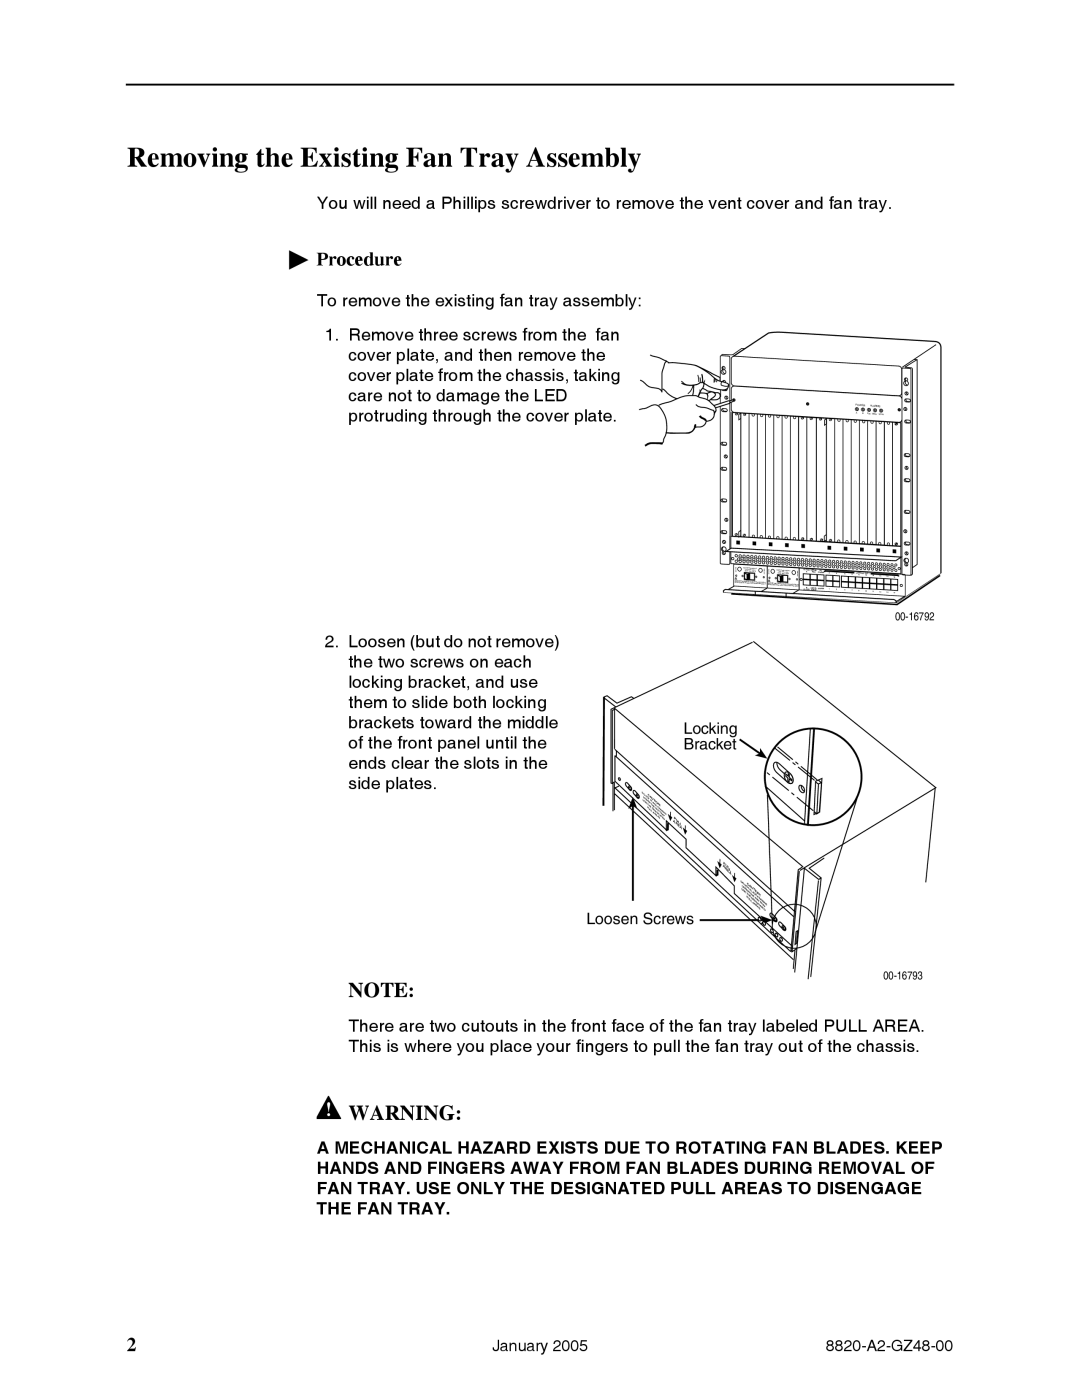 Paradyne 8820-S3-900 installation instructions Removing the Existing Fan Tray Assembly, Procedure 